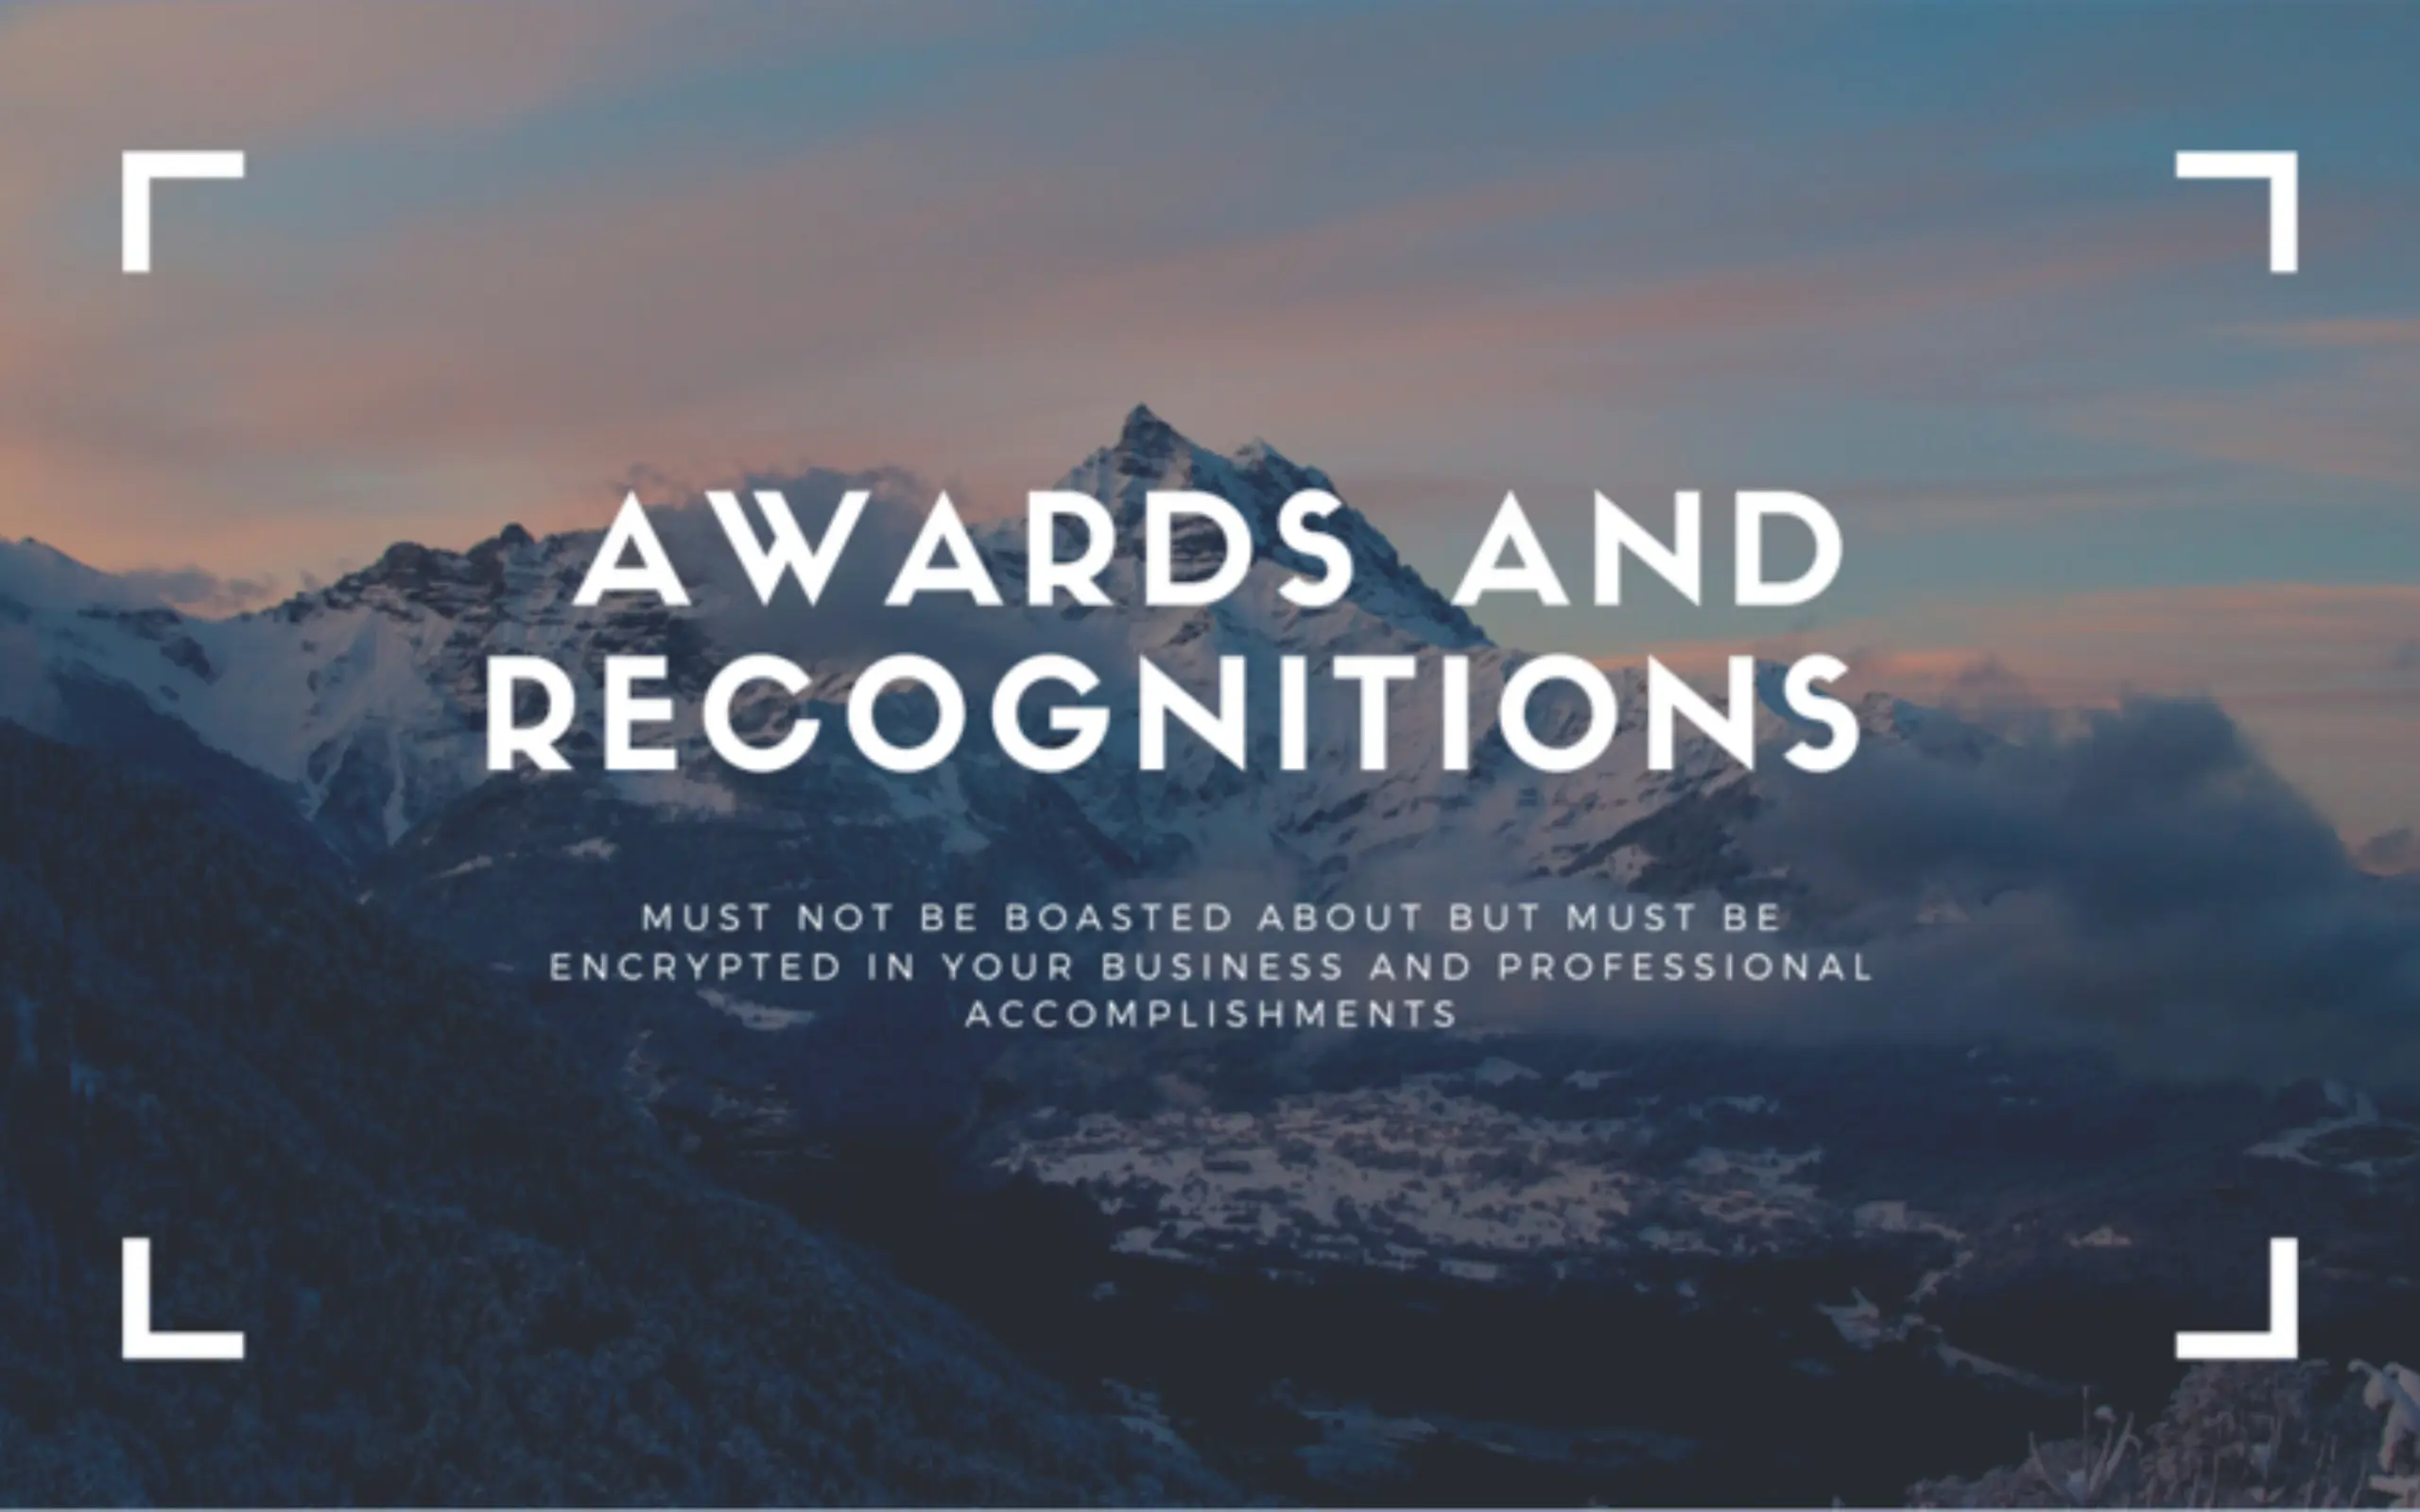 Awards-and-Recognitions-Must-Not-Be-Boasted-About-but-Must-Be-Encrypted-in-Your-Business-and-Professional-Accomplishments